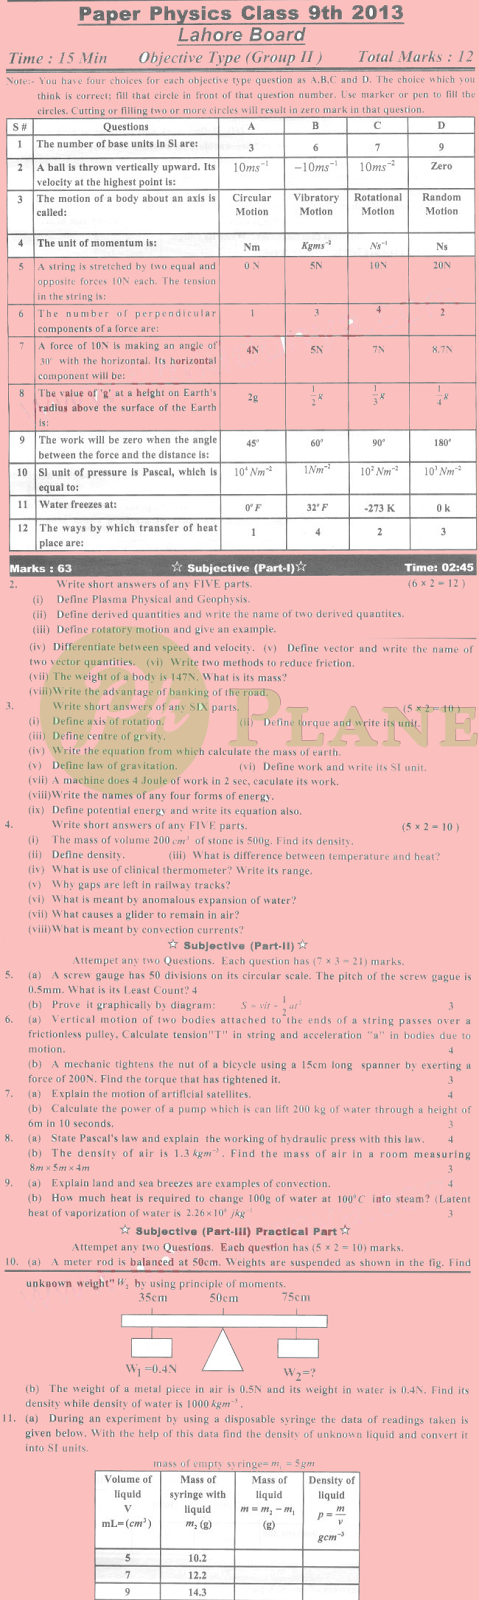 Past Papers of 9th Class Lahore Board 2013 Physics in English